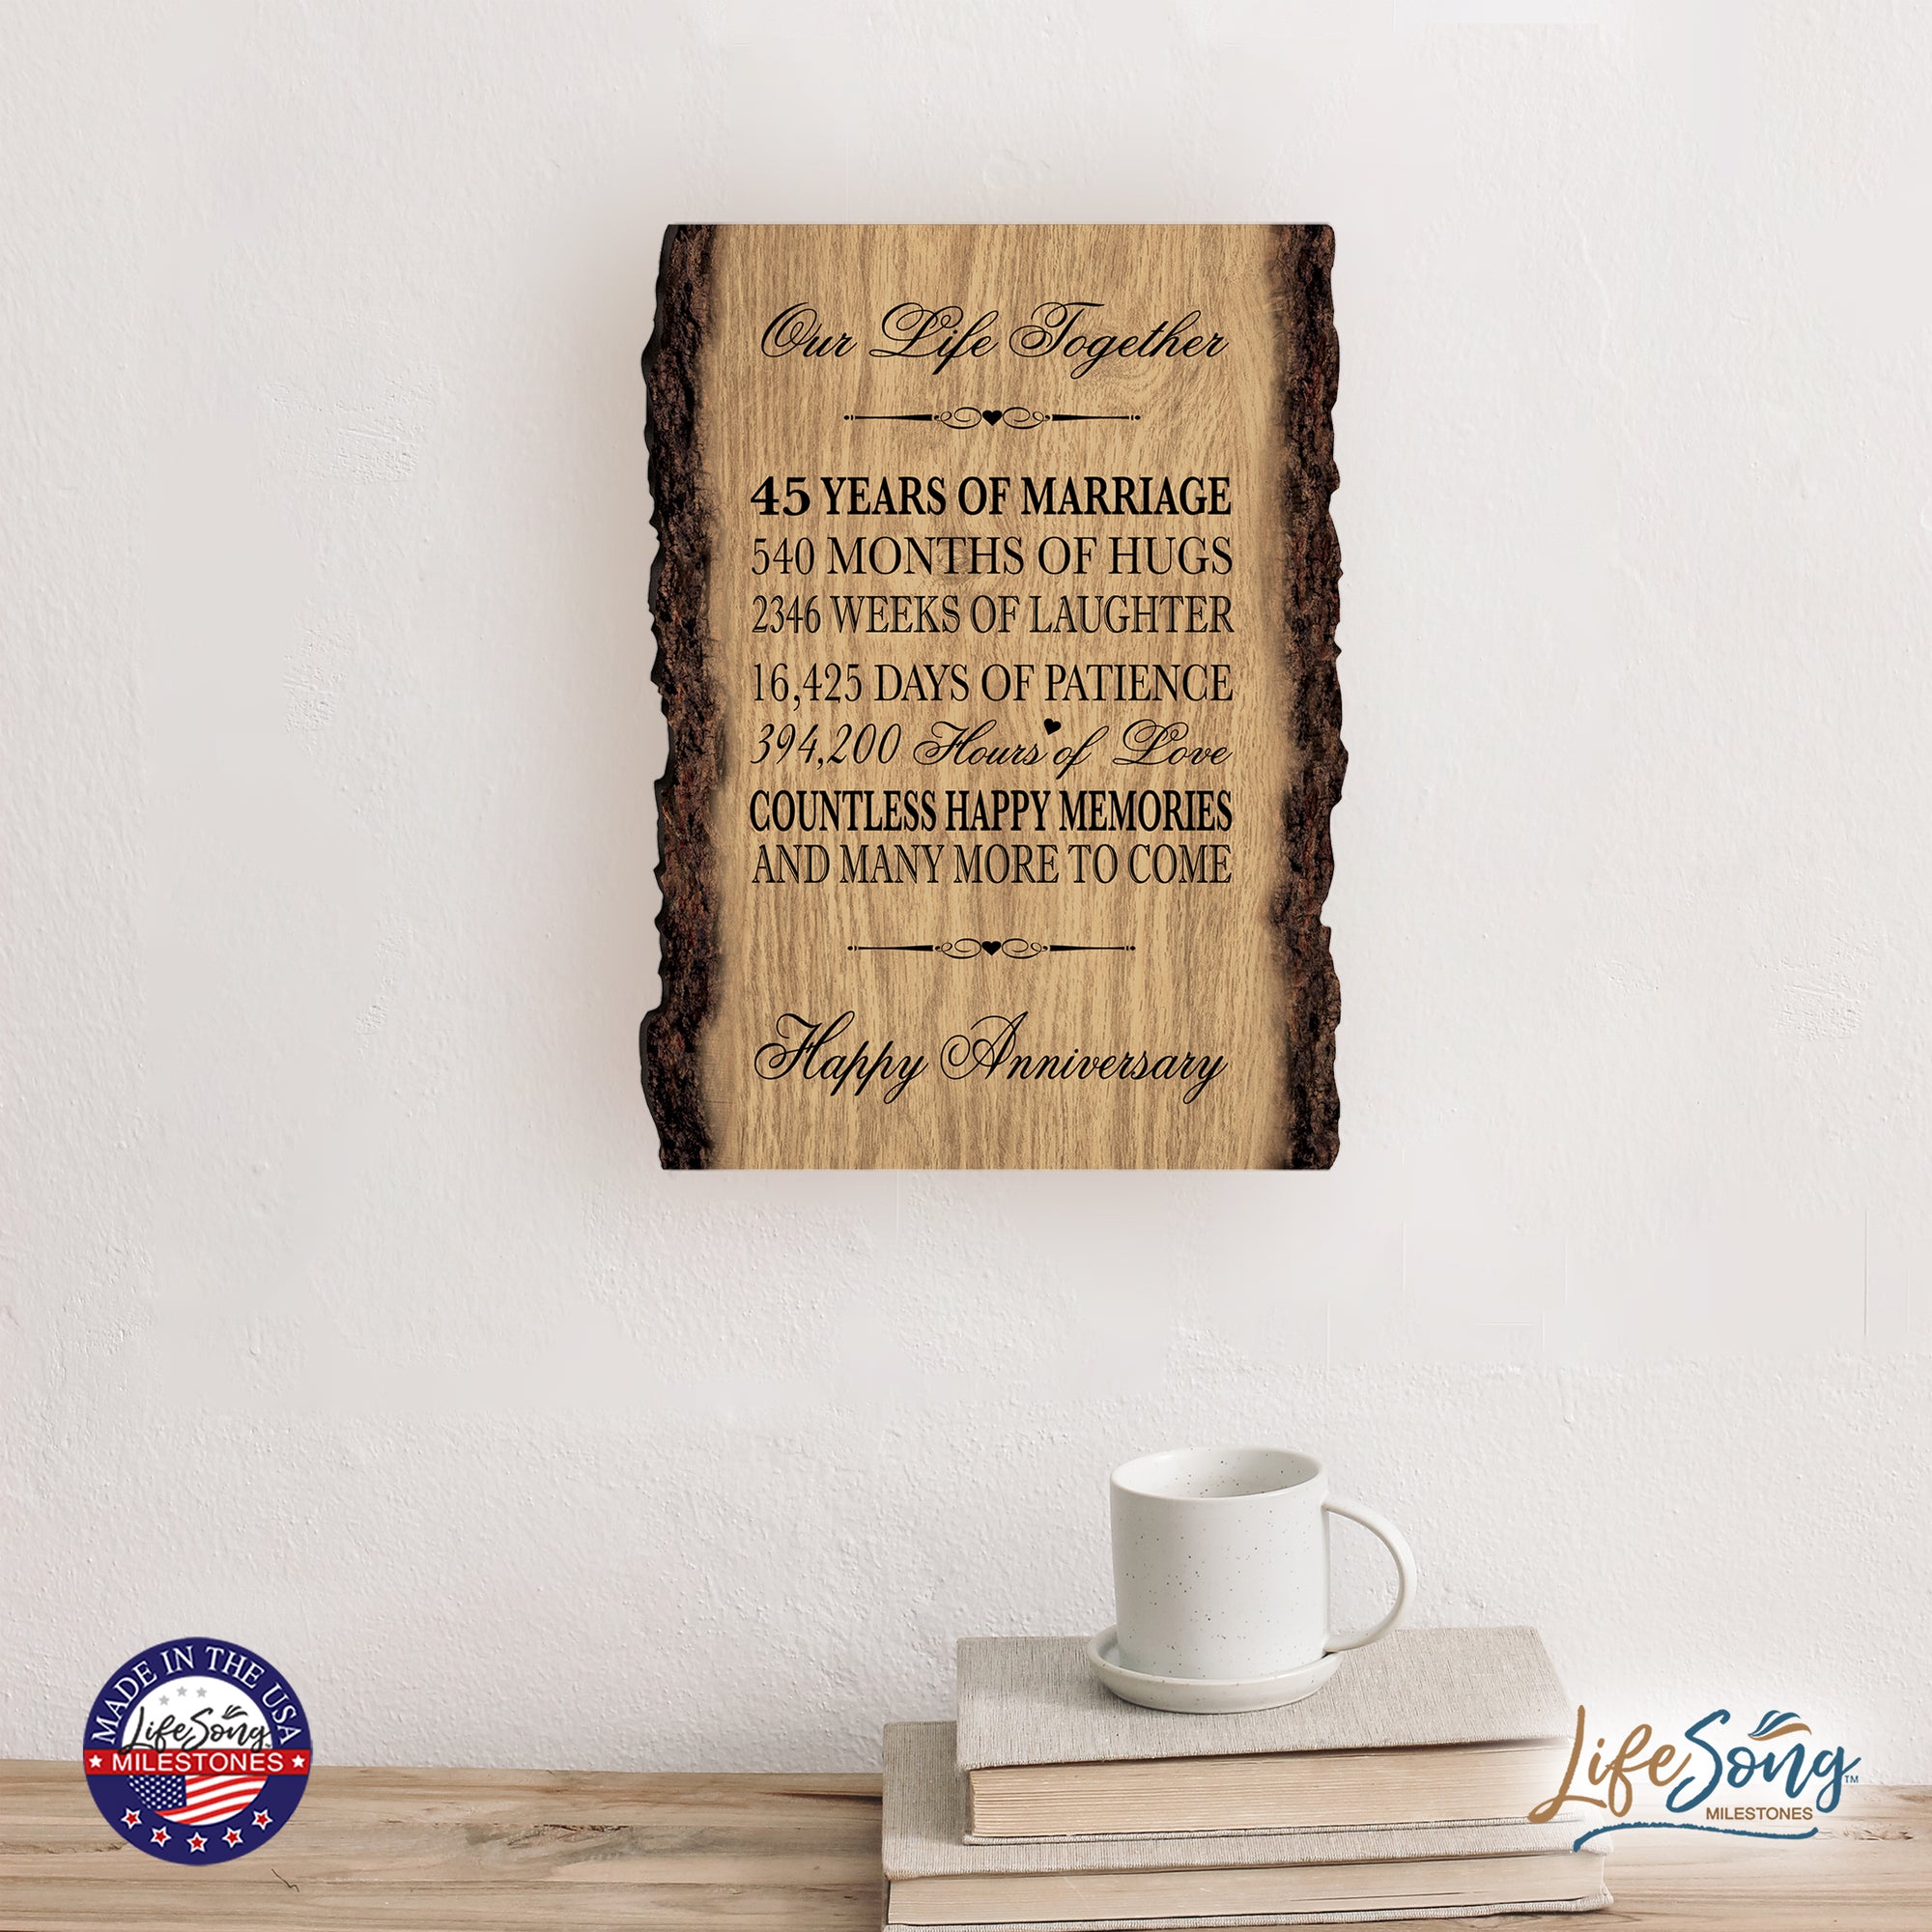 Rustic Wedding Anniversary 9x12 Barky Wall Plaque Gift For Parents, Grandparents New Couple - 45 Years Of Marriage